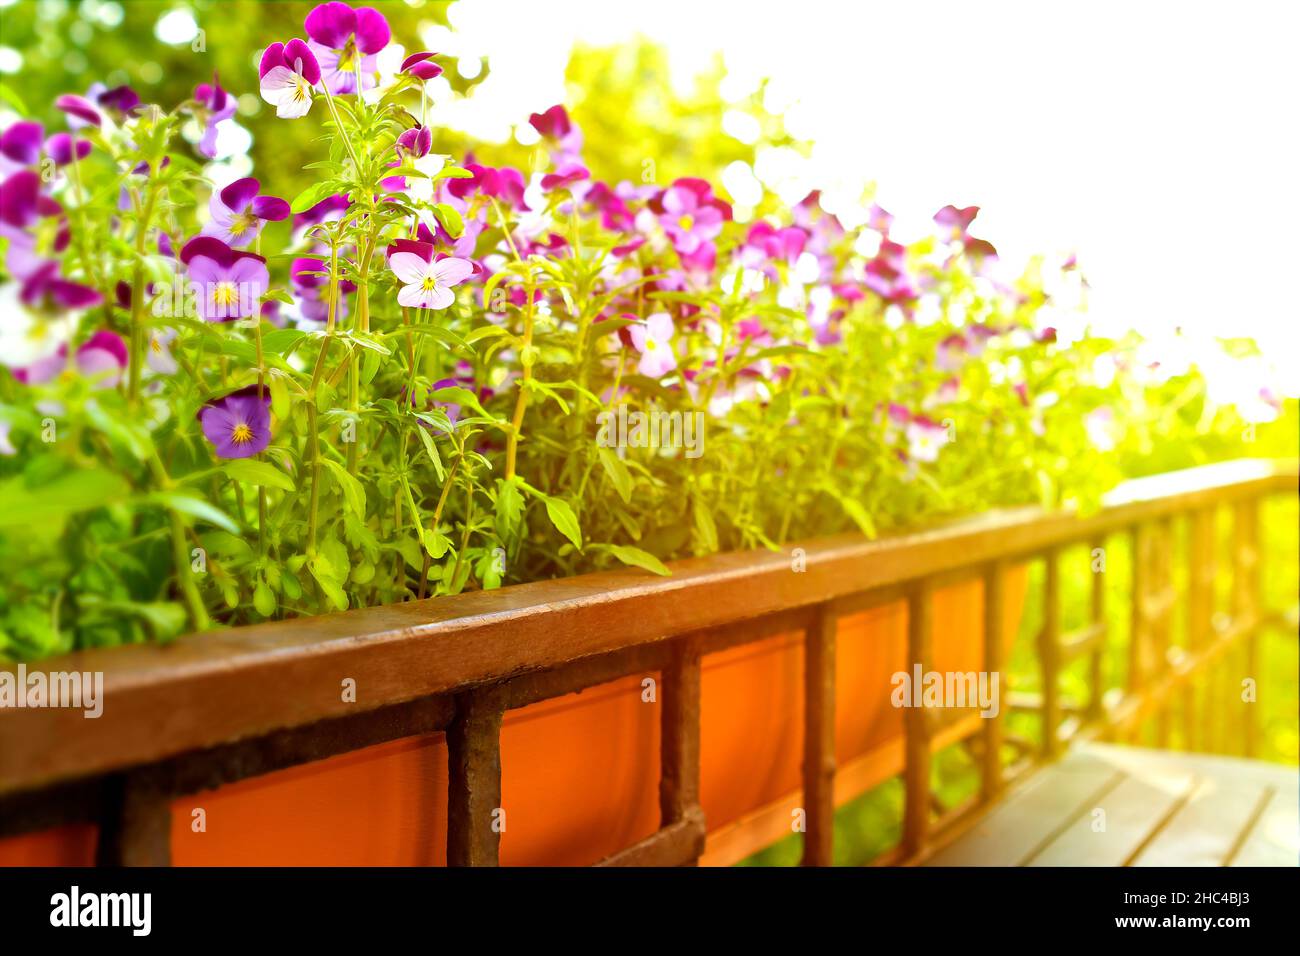 Purple pansies with cute little flowers in a terracotta colored flower box on a balcony in spring, background texture. Stock Photo